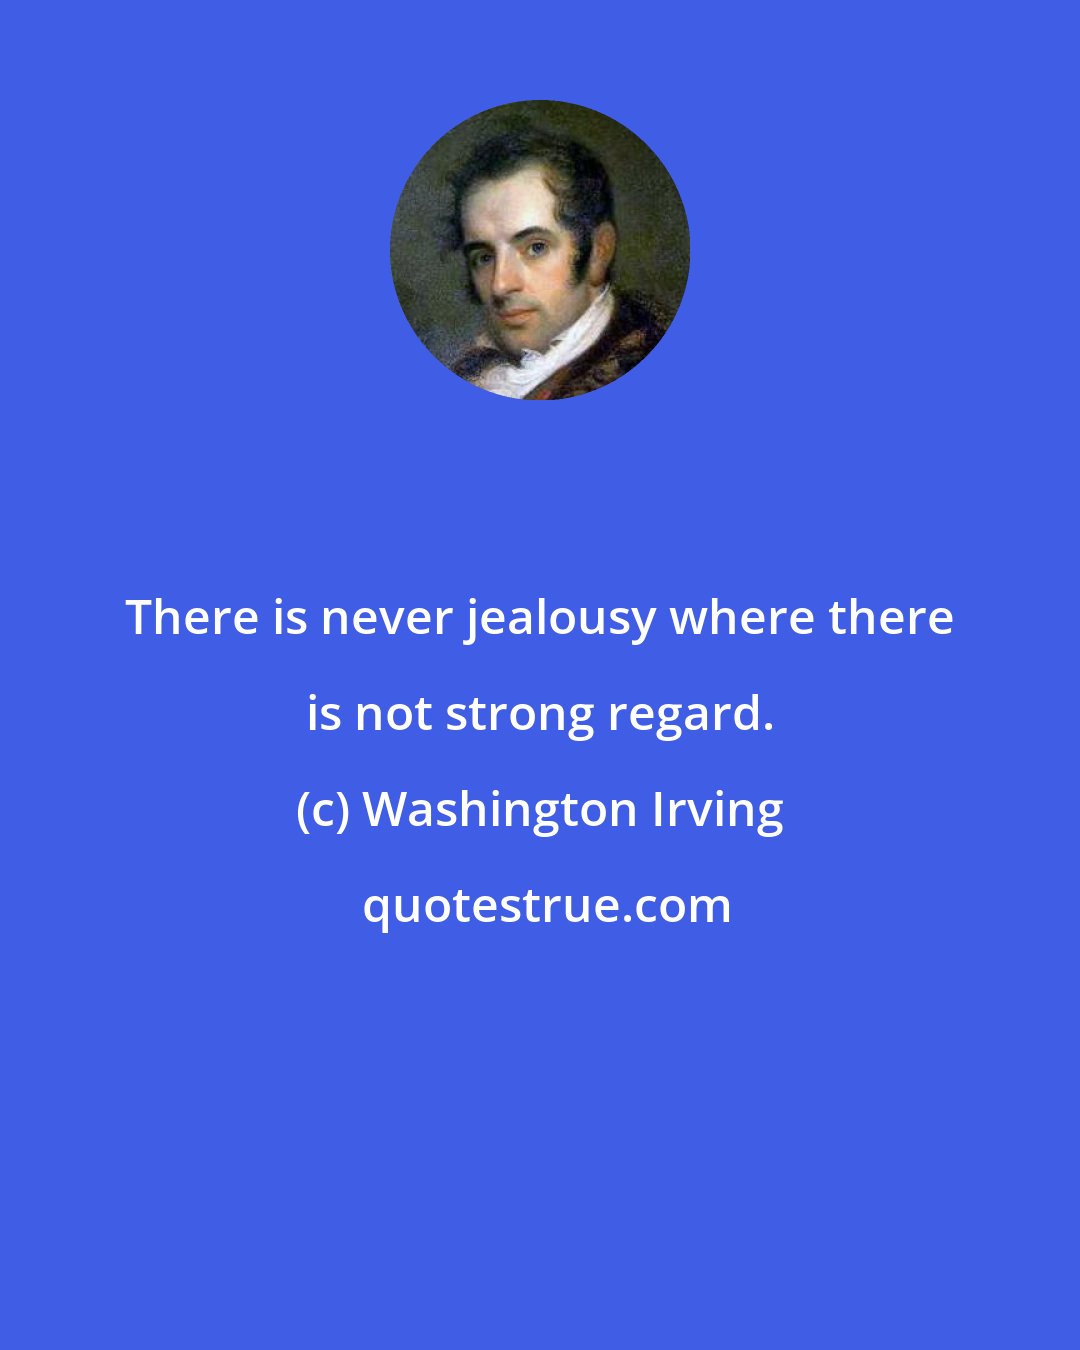 Washington Irving: There is never jealousy where there is not strong regard.